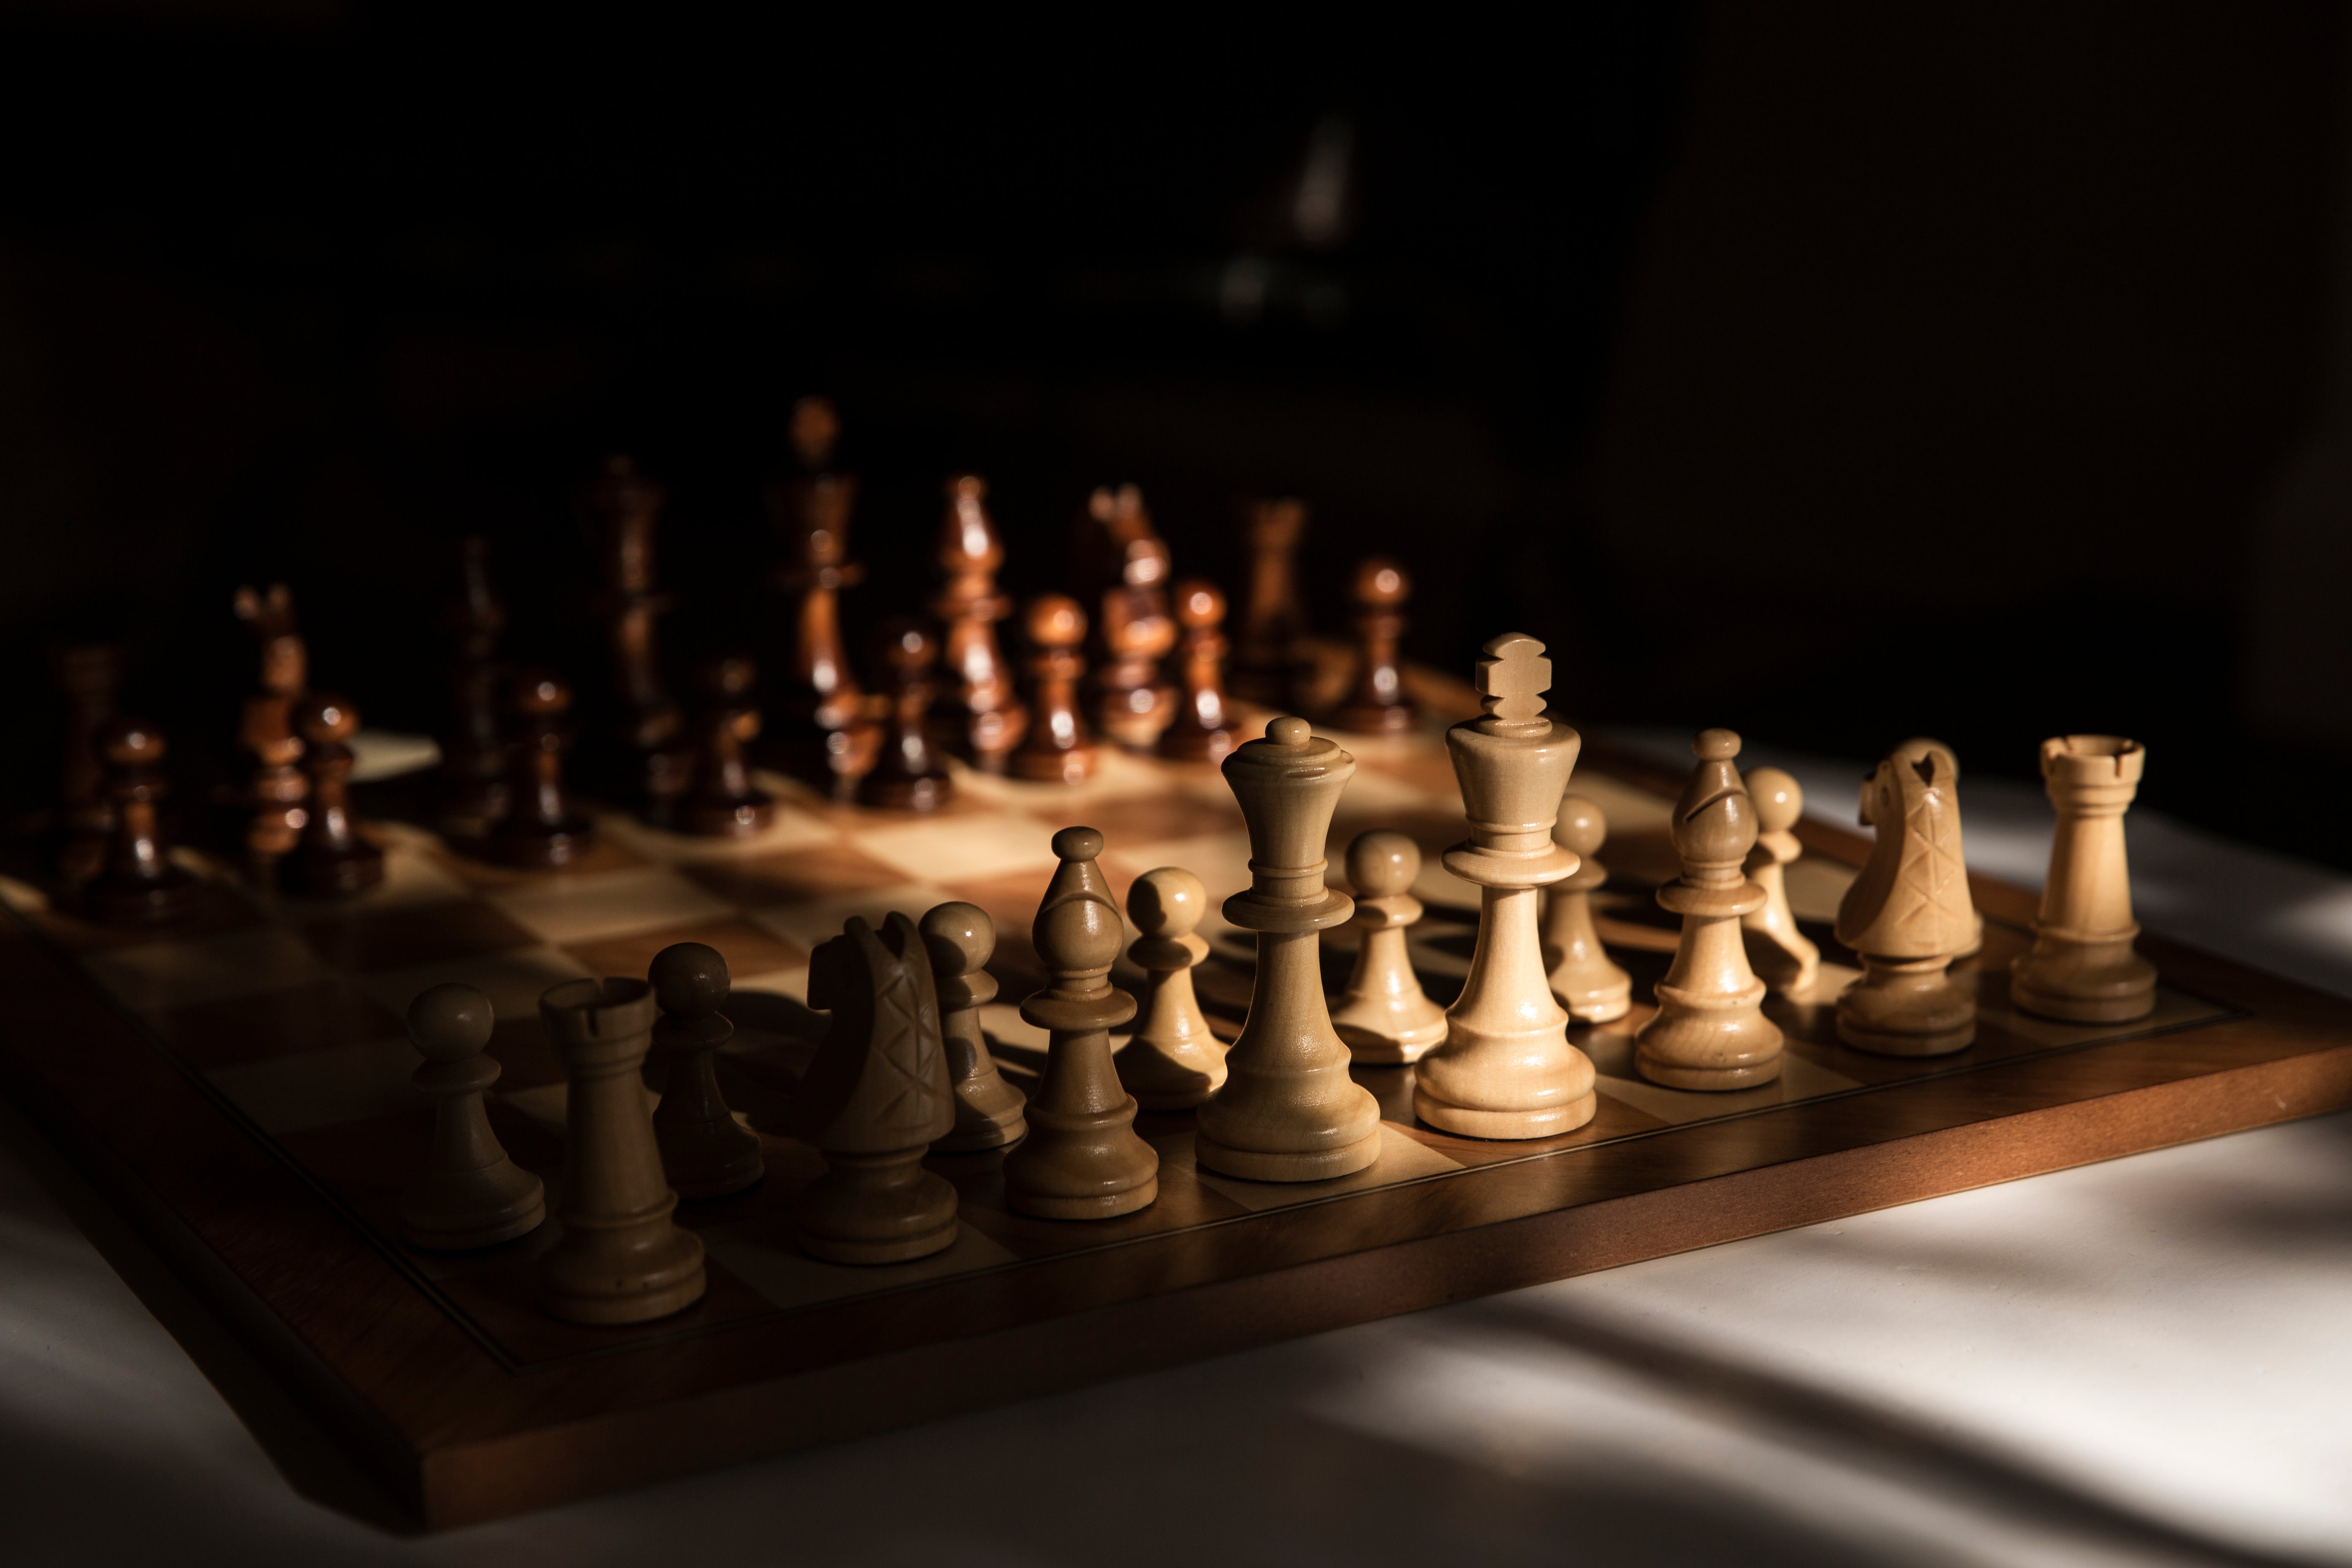 Browse Free HD Images of Wooden Chess Set In Partial Window Light